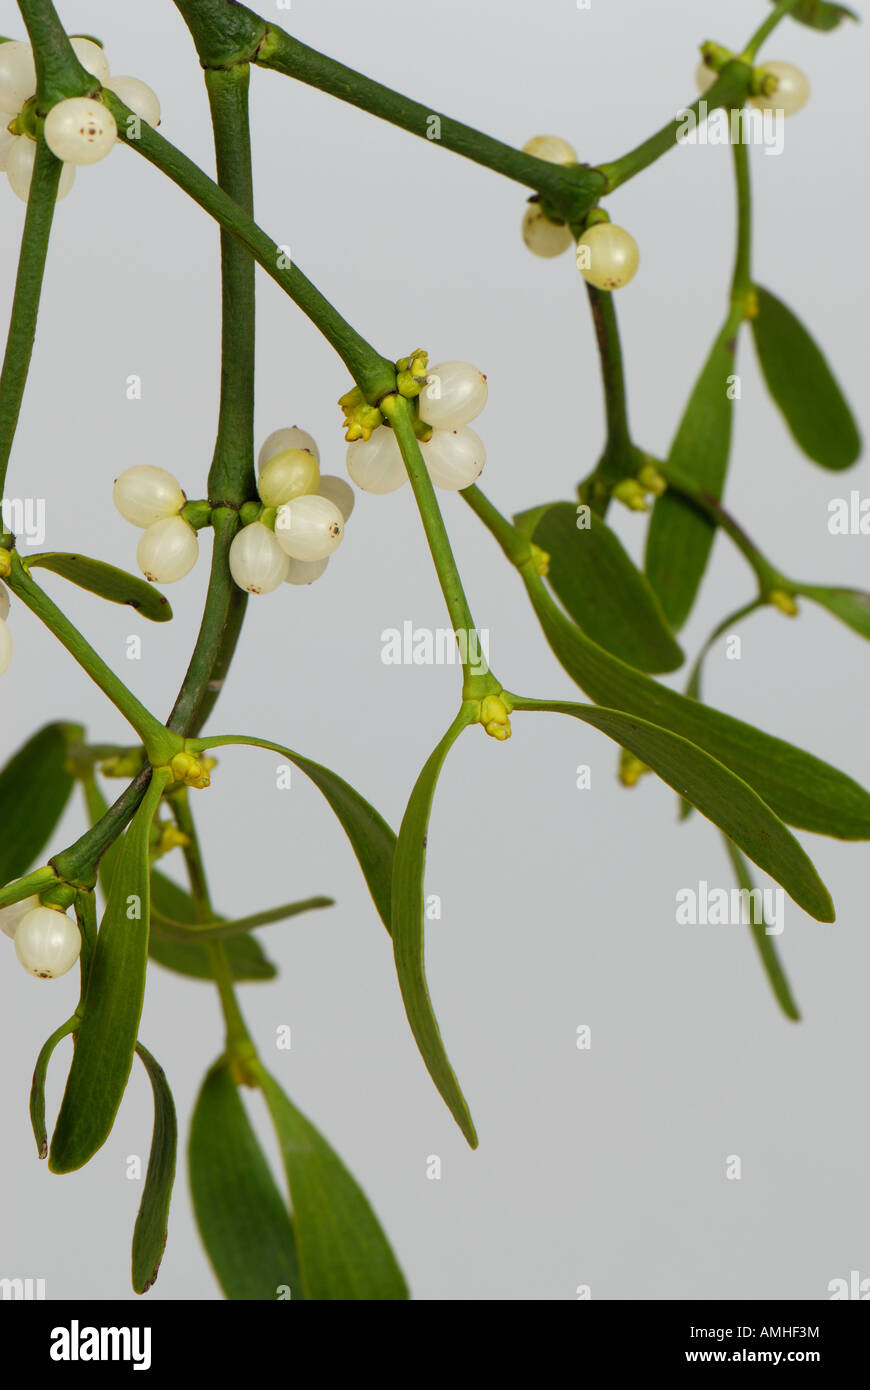 Mistletoe Viscum album leaves and white berries of traditional Christmas sprig Stock Photo